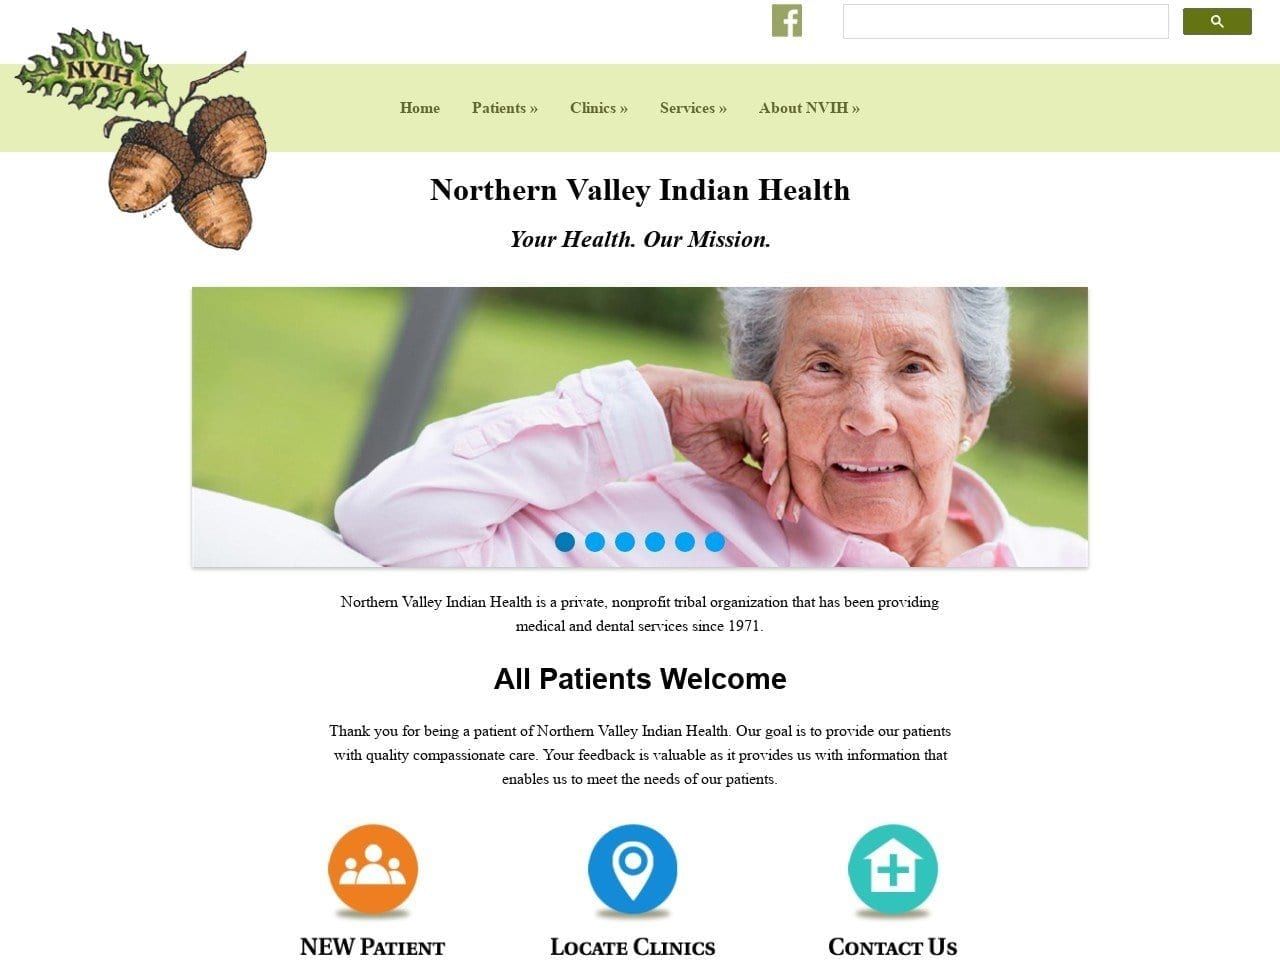 Northern Valley Indian Health Inc. Website Screenshot from nvih.org